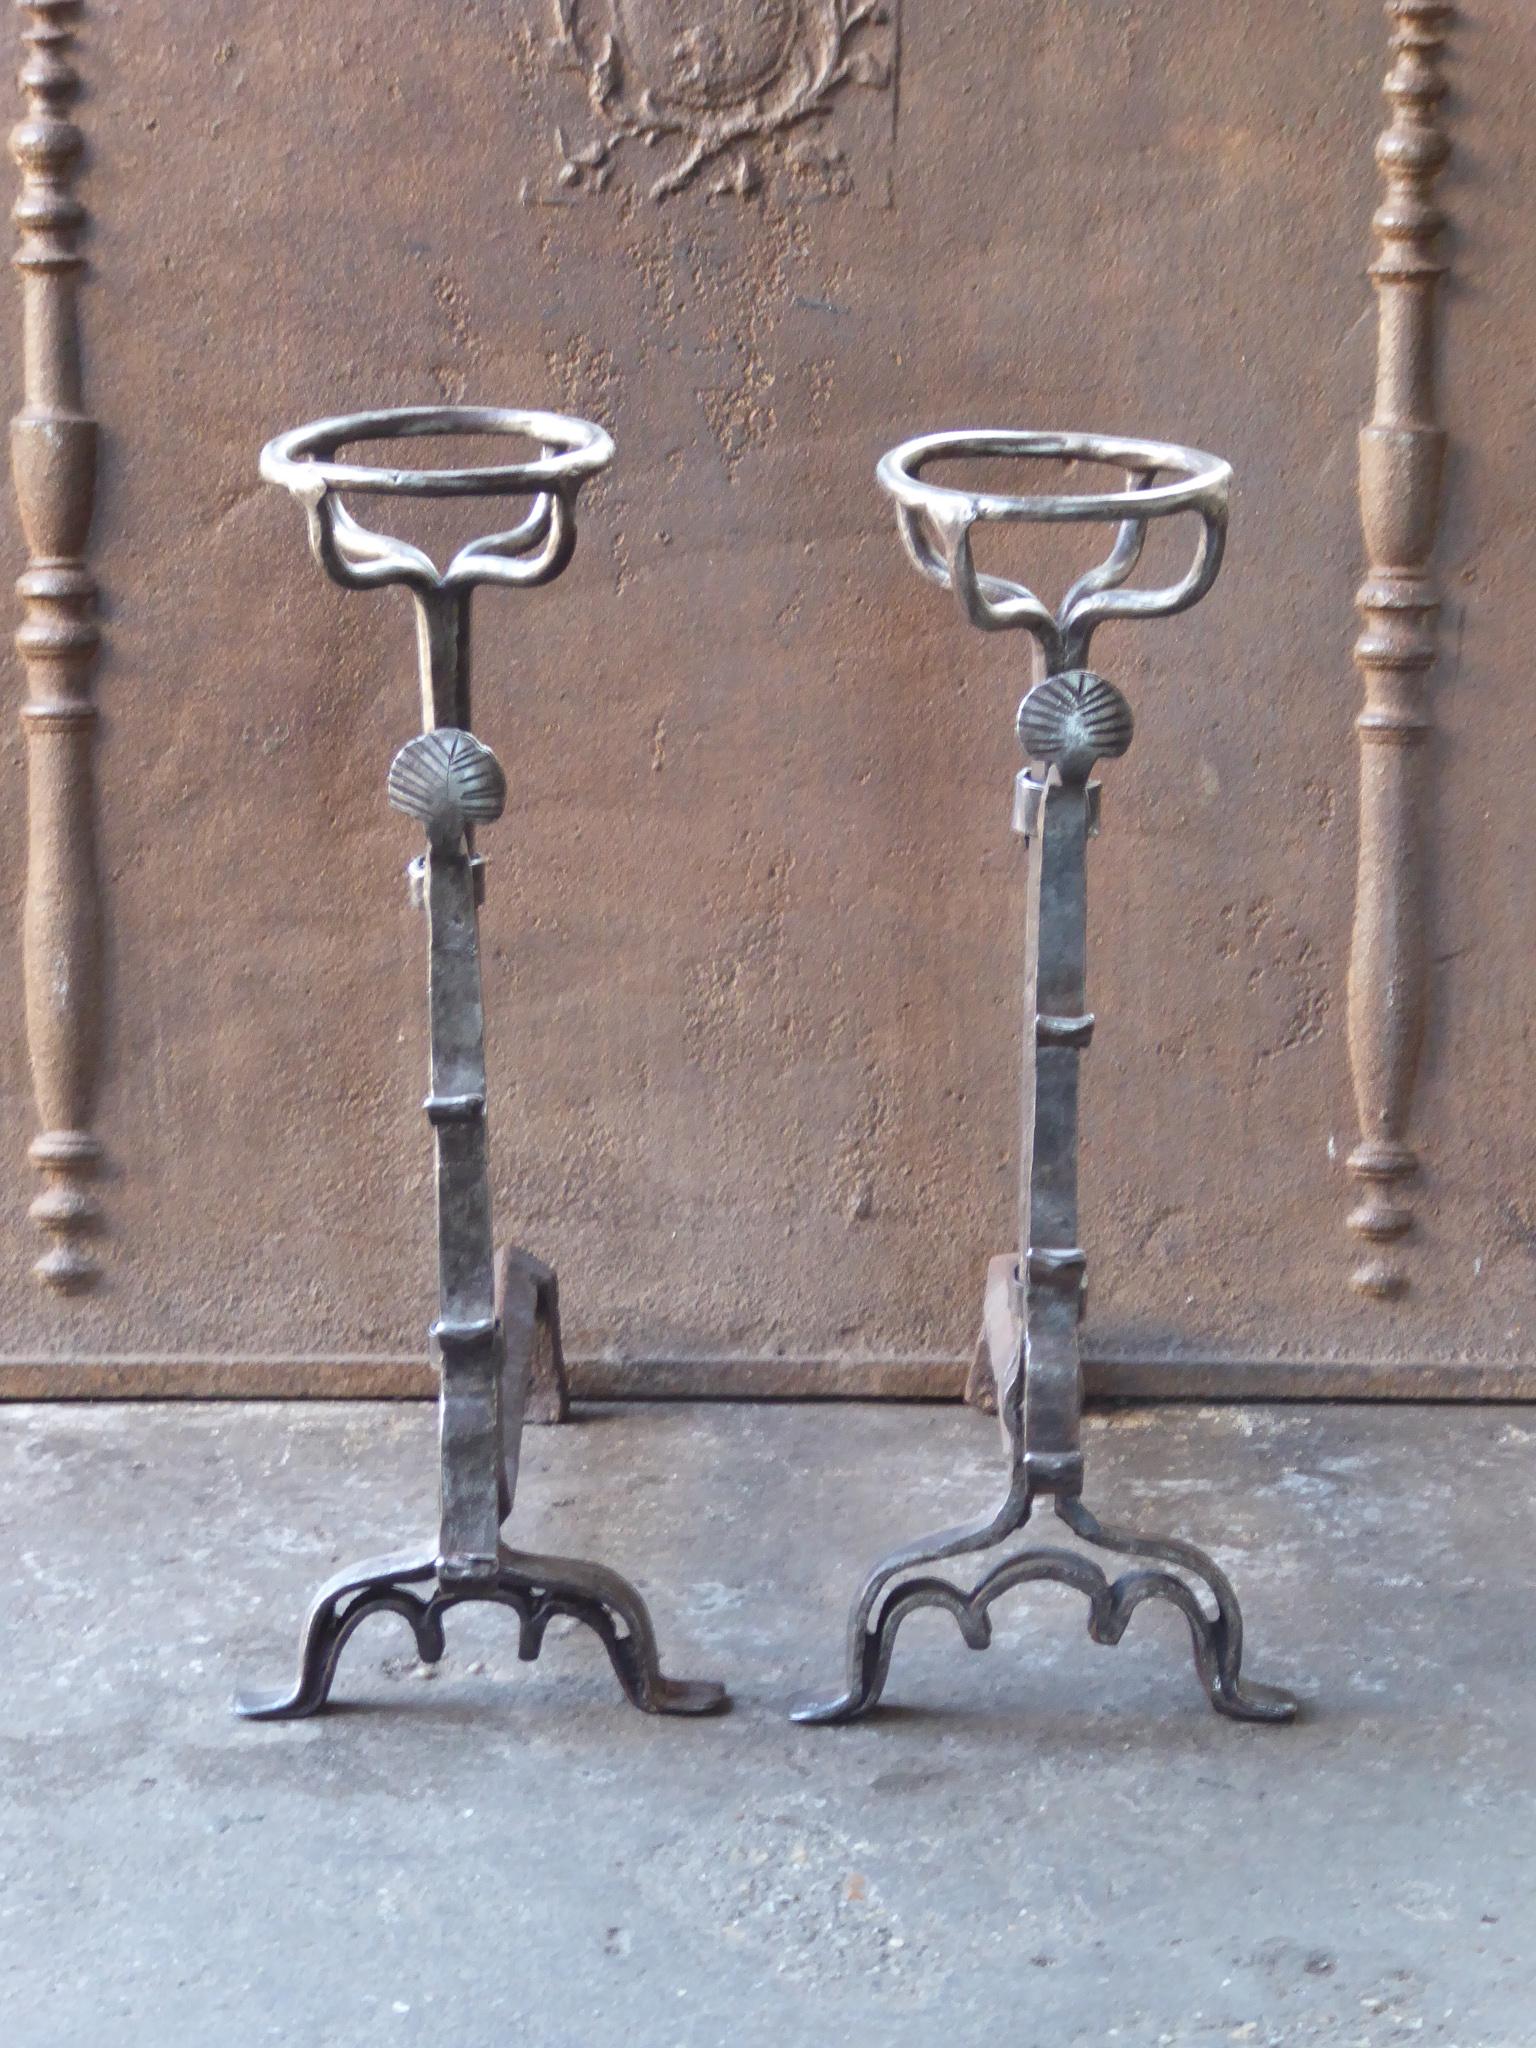 Beautifully forged 17th century French andirons made of wrought iron. The style of the andirons is Louis III. The andirons have decorated spit hooks to grill food. They are in a good condition.